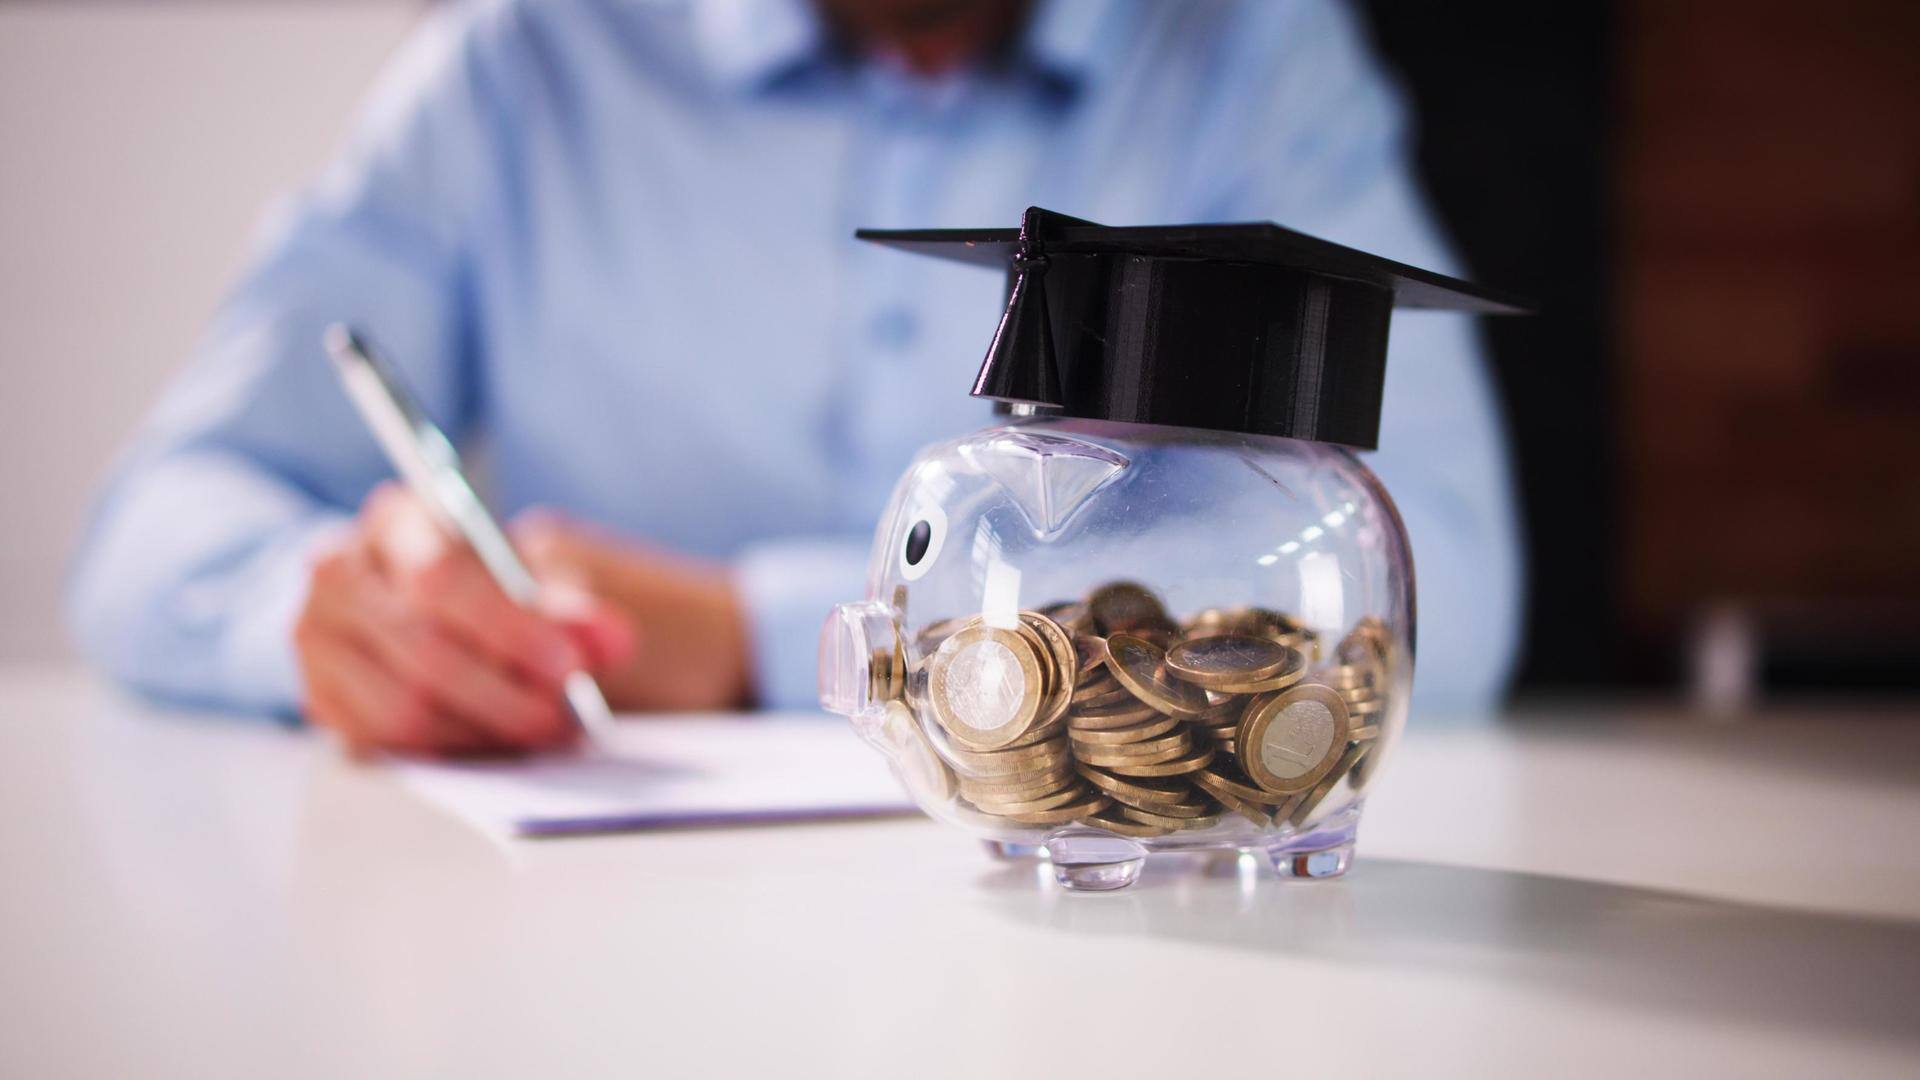 Studying in college? Here's how you can manage money